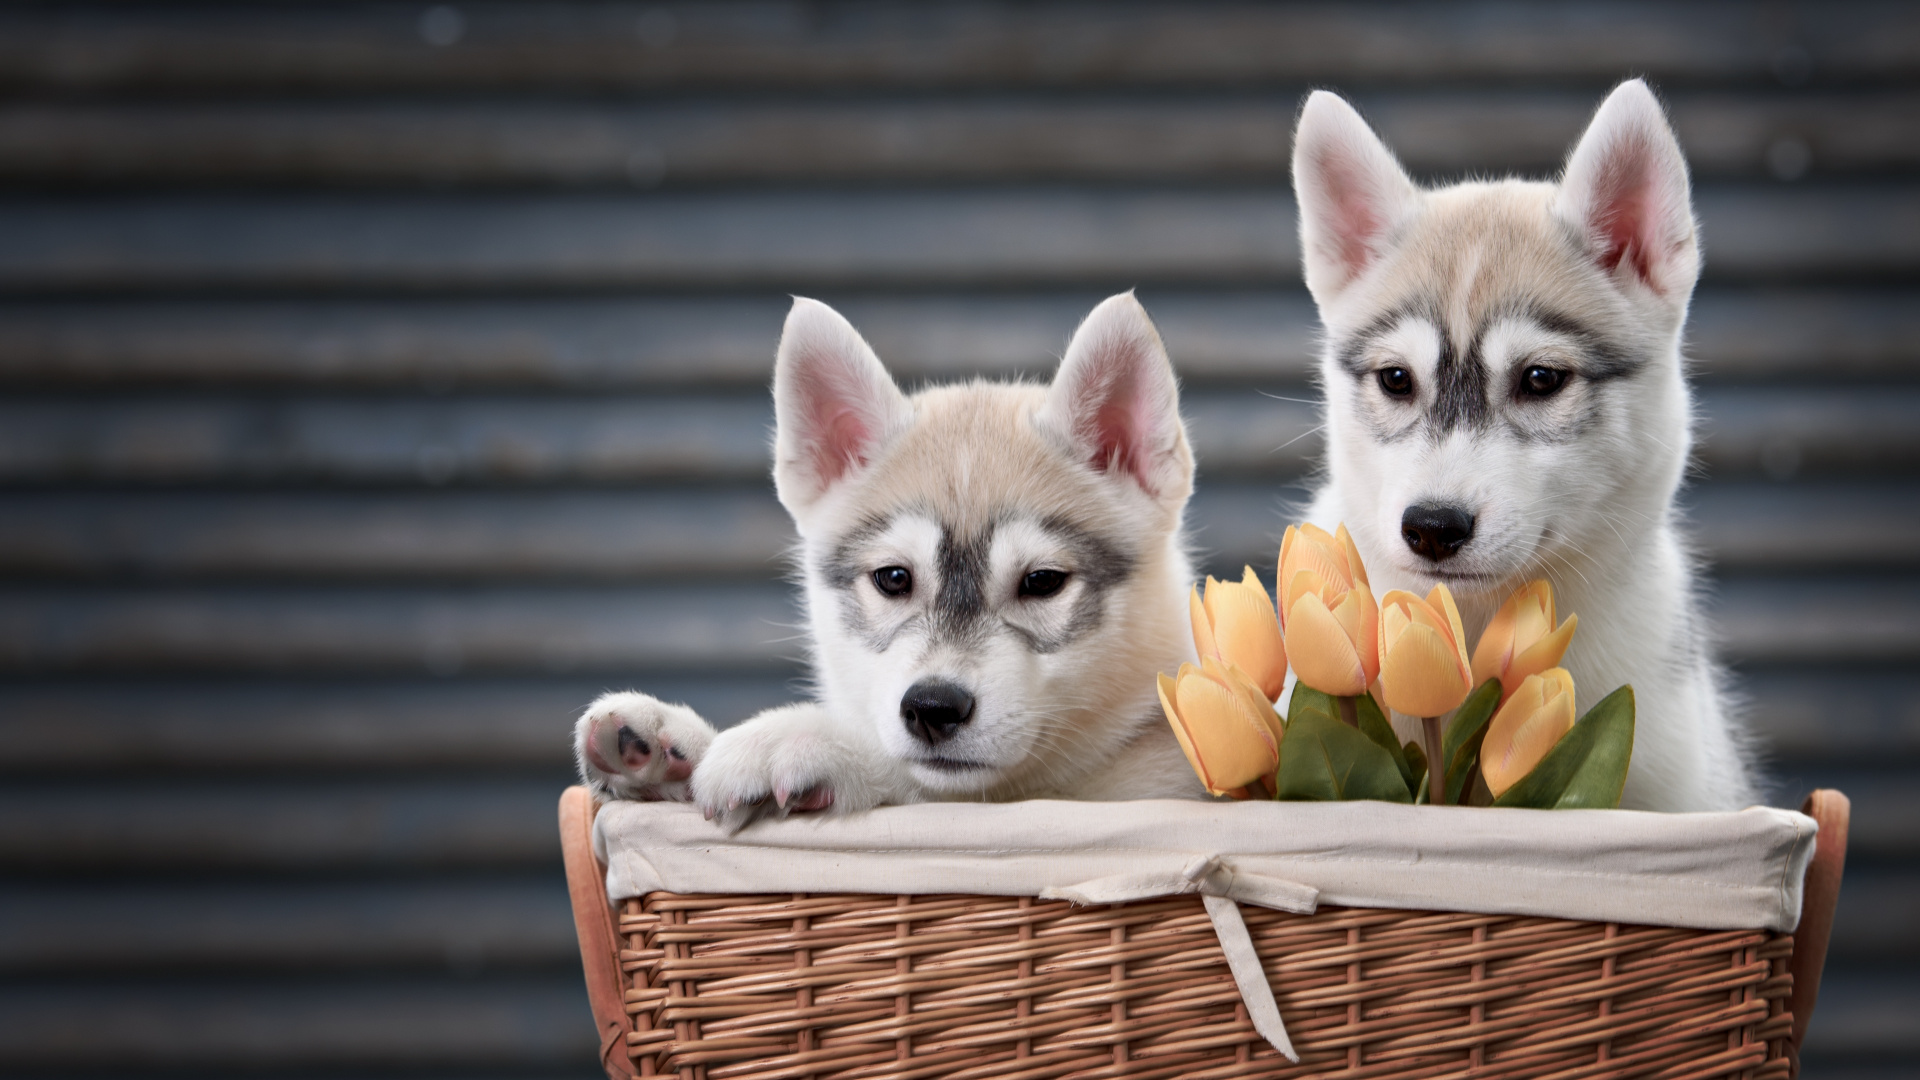 White Siberian Husky Puppy on Brown Woven Basket. Wallpaper in 1920x1080 Resolution